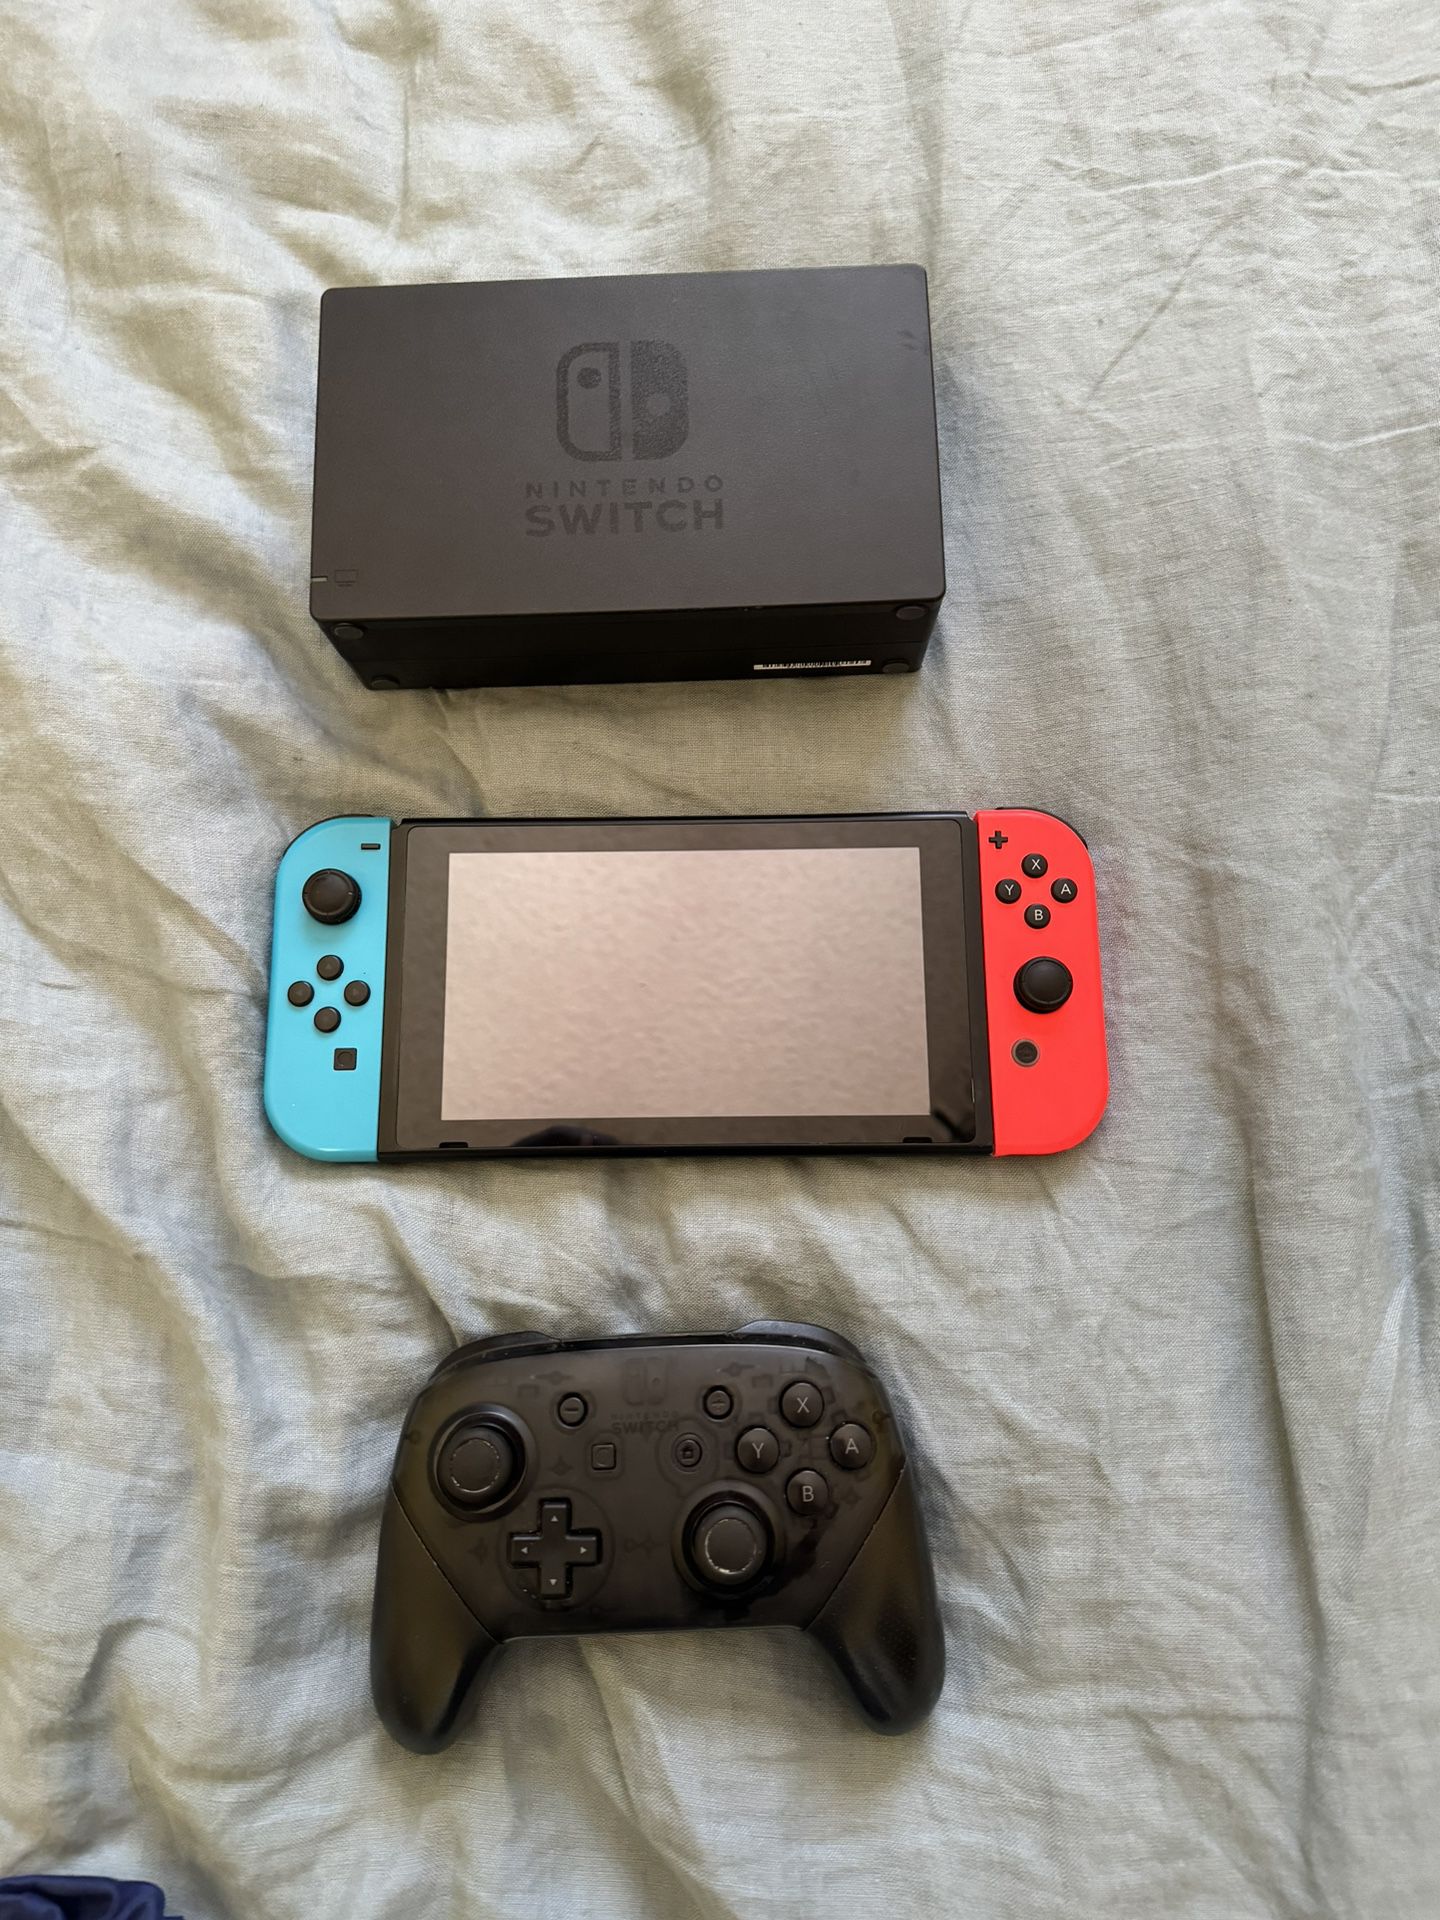 Nintendo Switch and Pro Controller